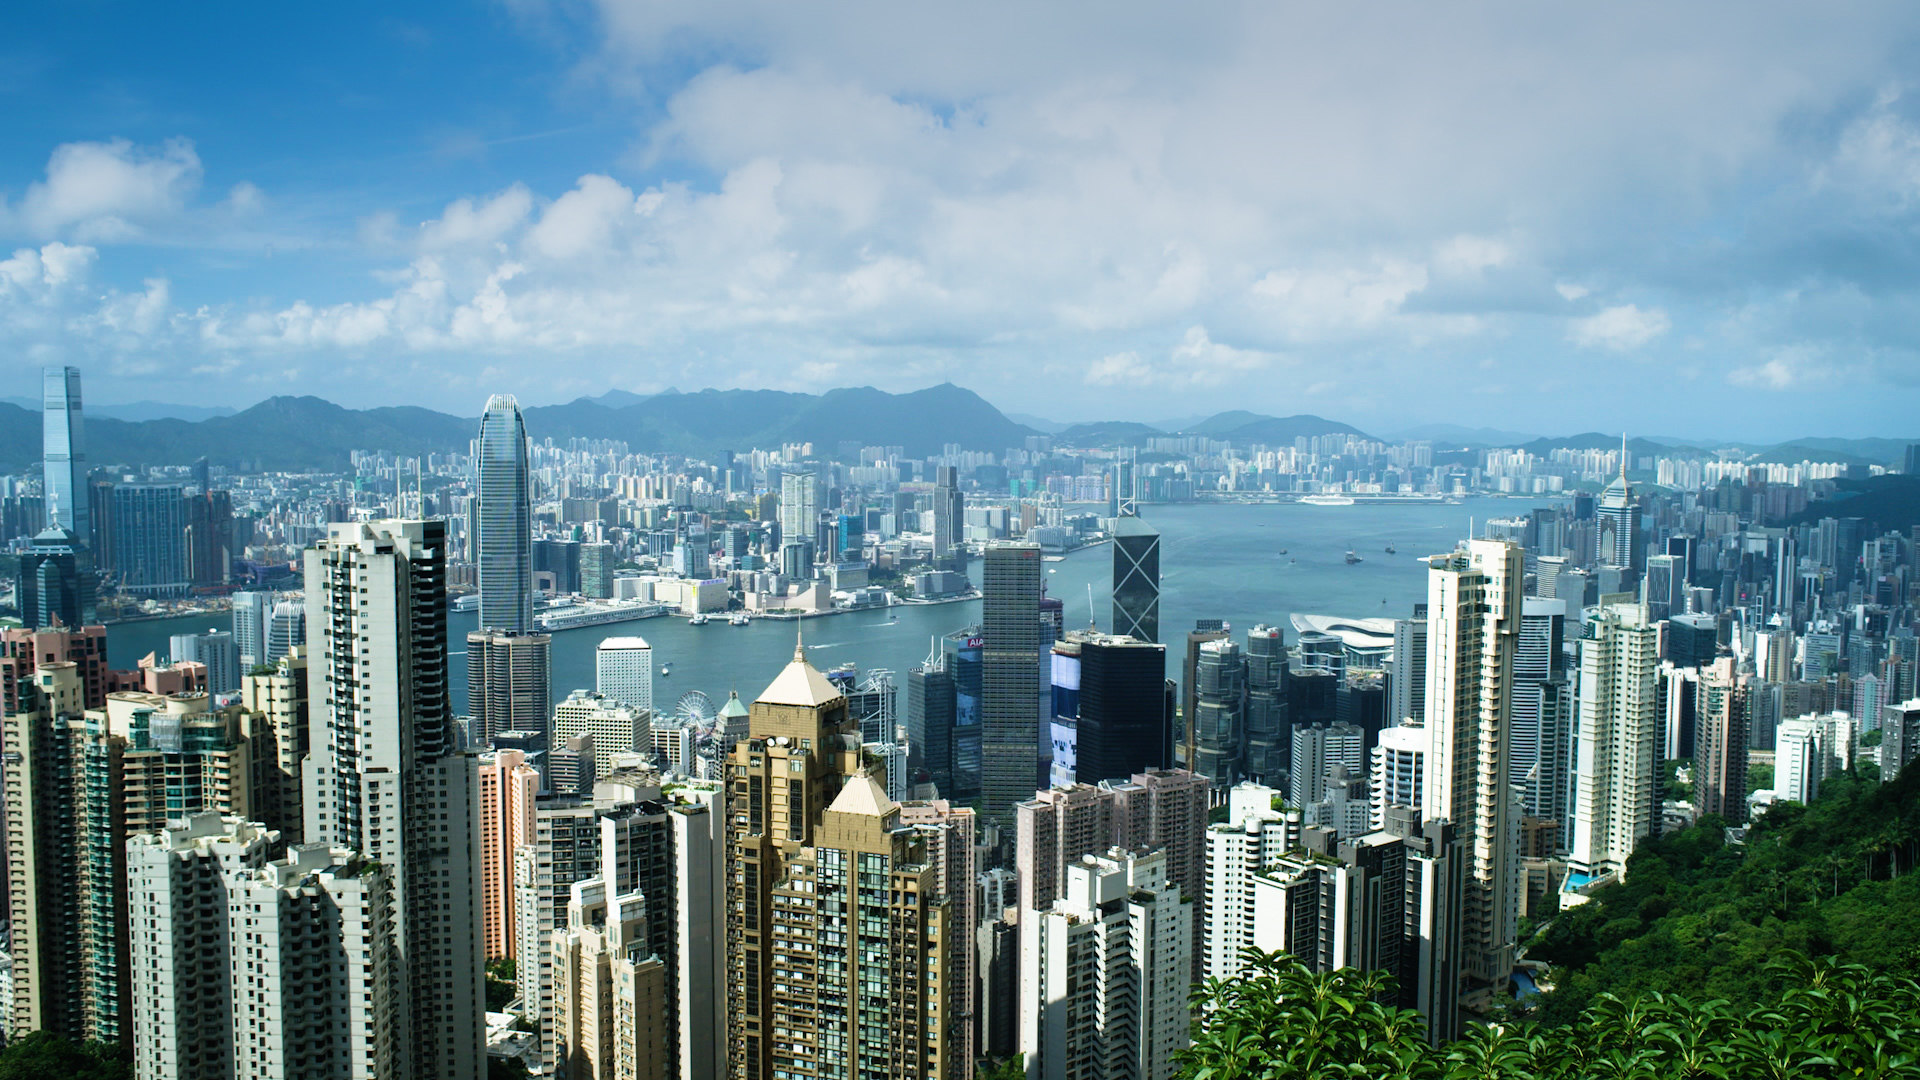 Leaders of Hong Kong enterprises are vouching for the continuing viability of the city as an international hub for business growth and development.